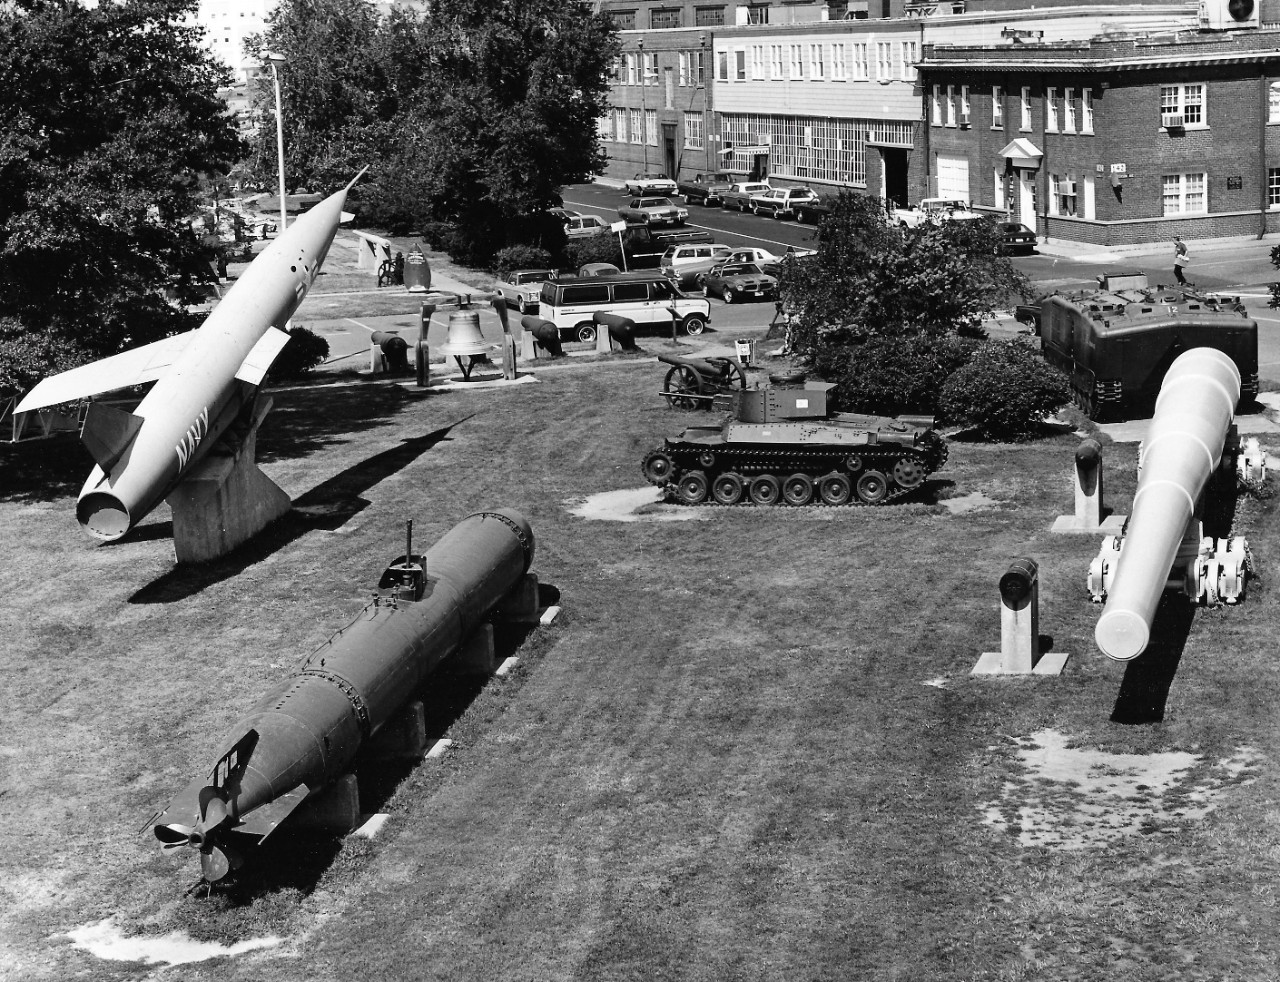 NMUSN-153:  Willard Park, Washington Navy Yard, Washington, D.C. 1970s.    View looks west.    Right to left.   Regulus II missile; Lighthouse Bell, 1897; Japanese Tank; 16” Gun; Japanese two-man submarine.   National Museum of the U.S. Navy Photograph Collection.   